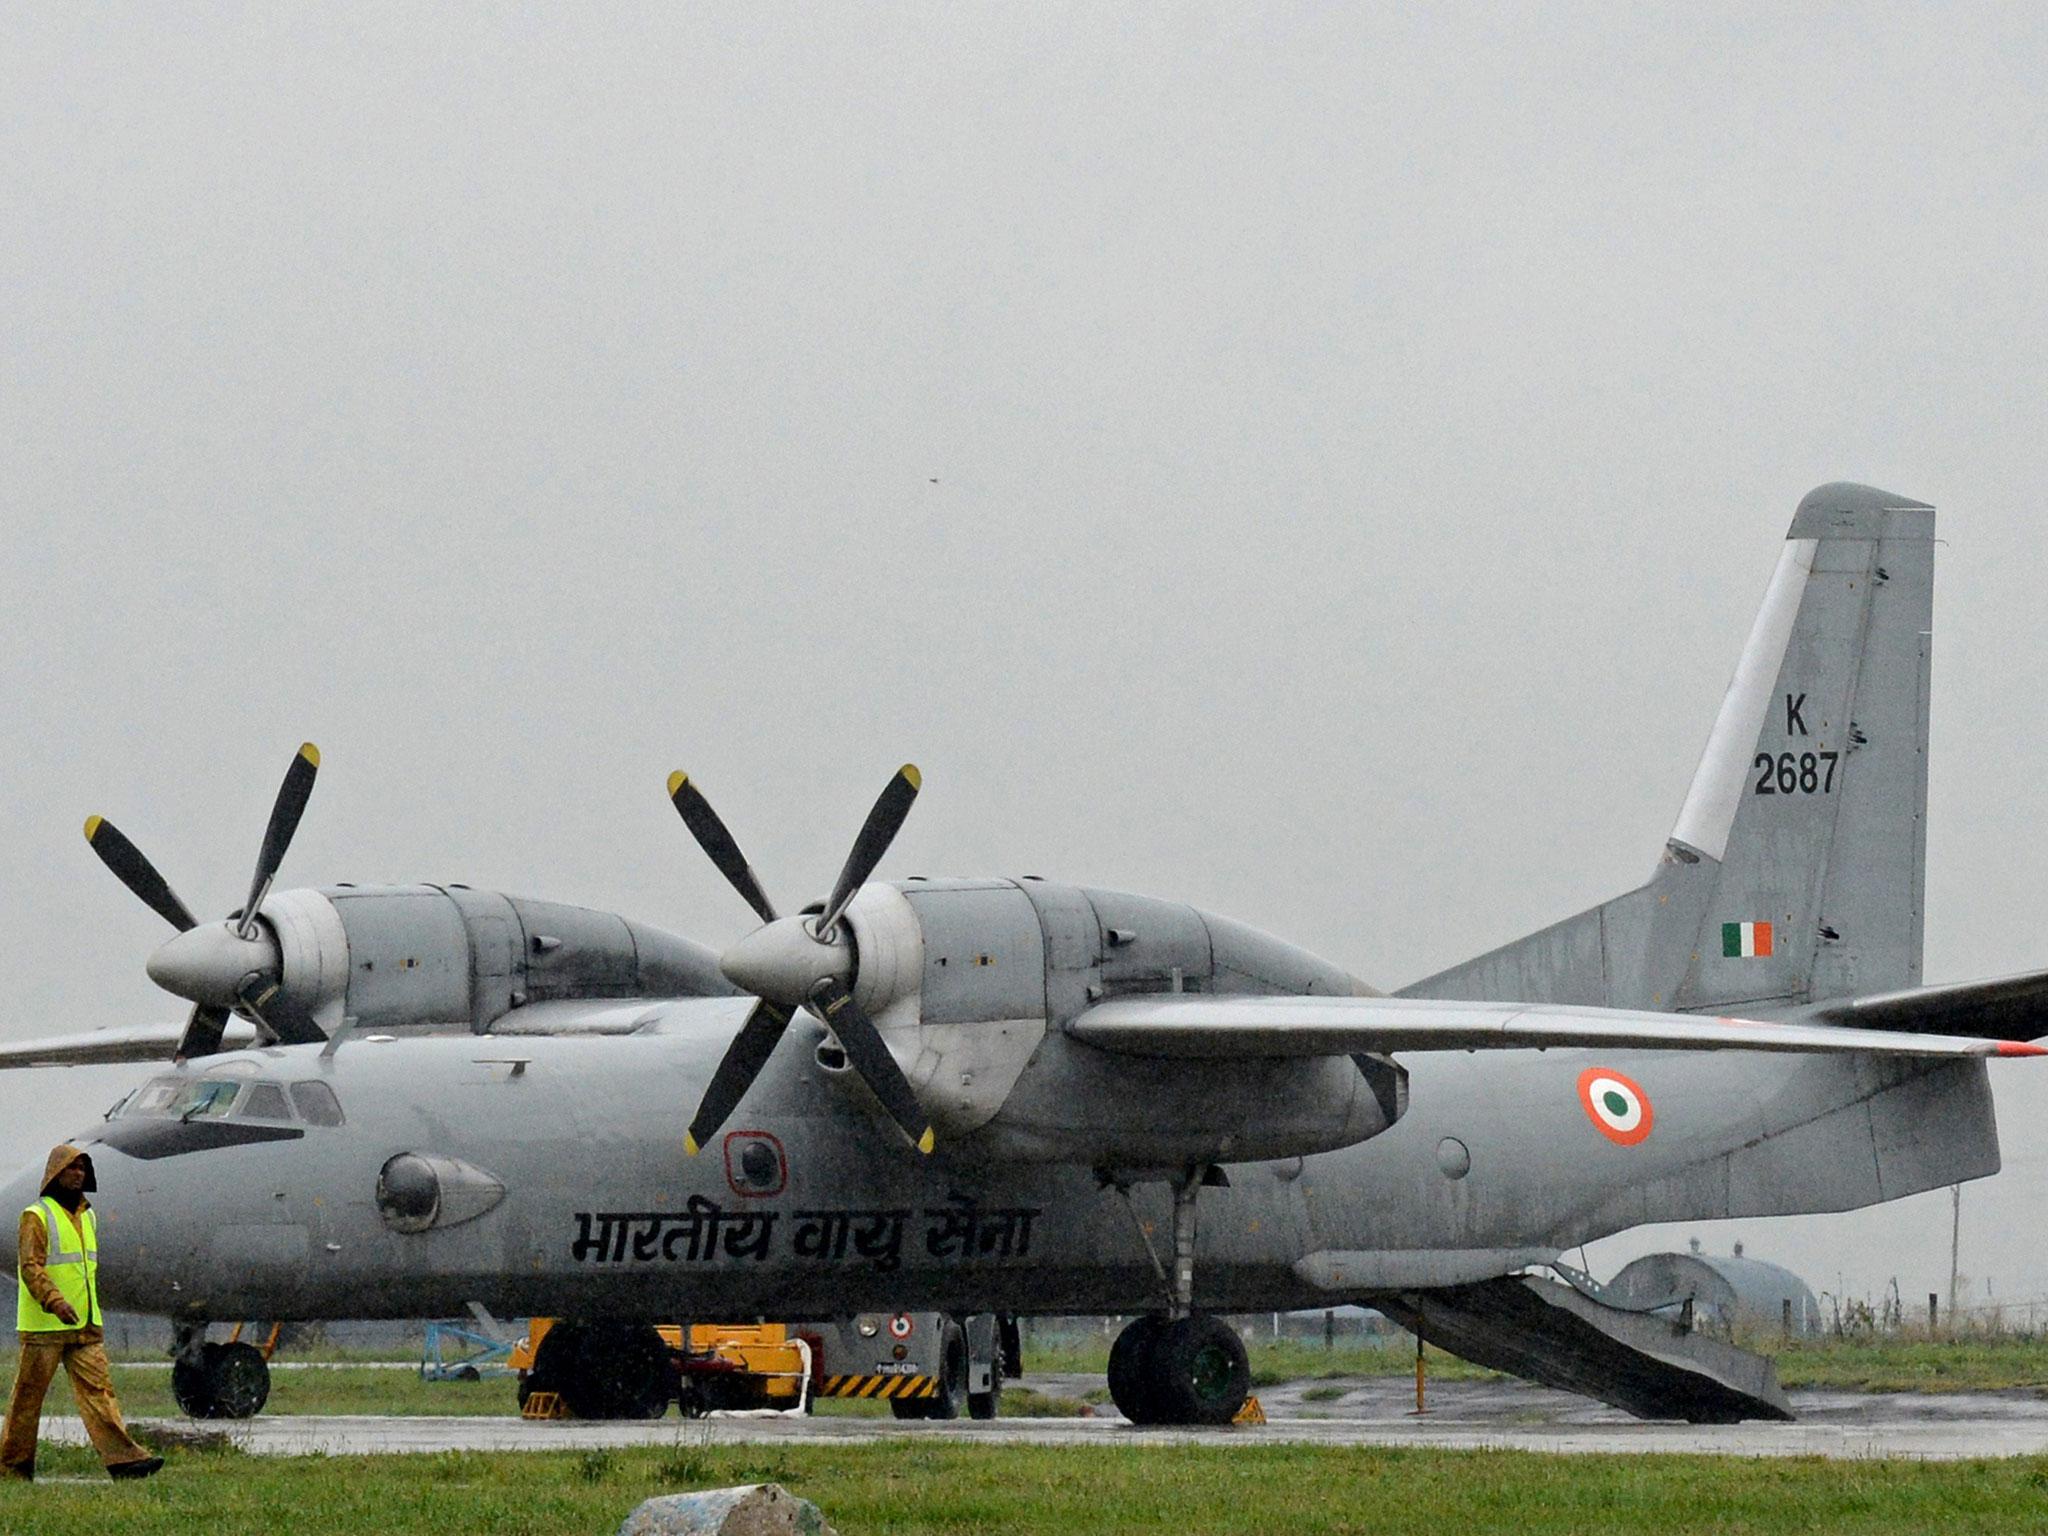 The Indian Air Force Antonov-32 has gone missing over the Bay of Bengal